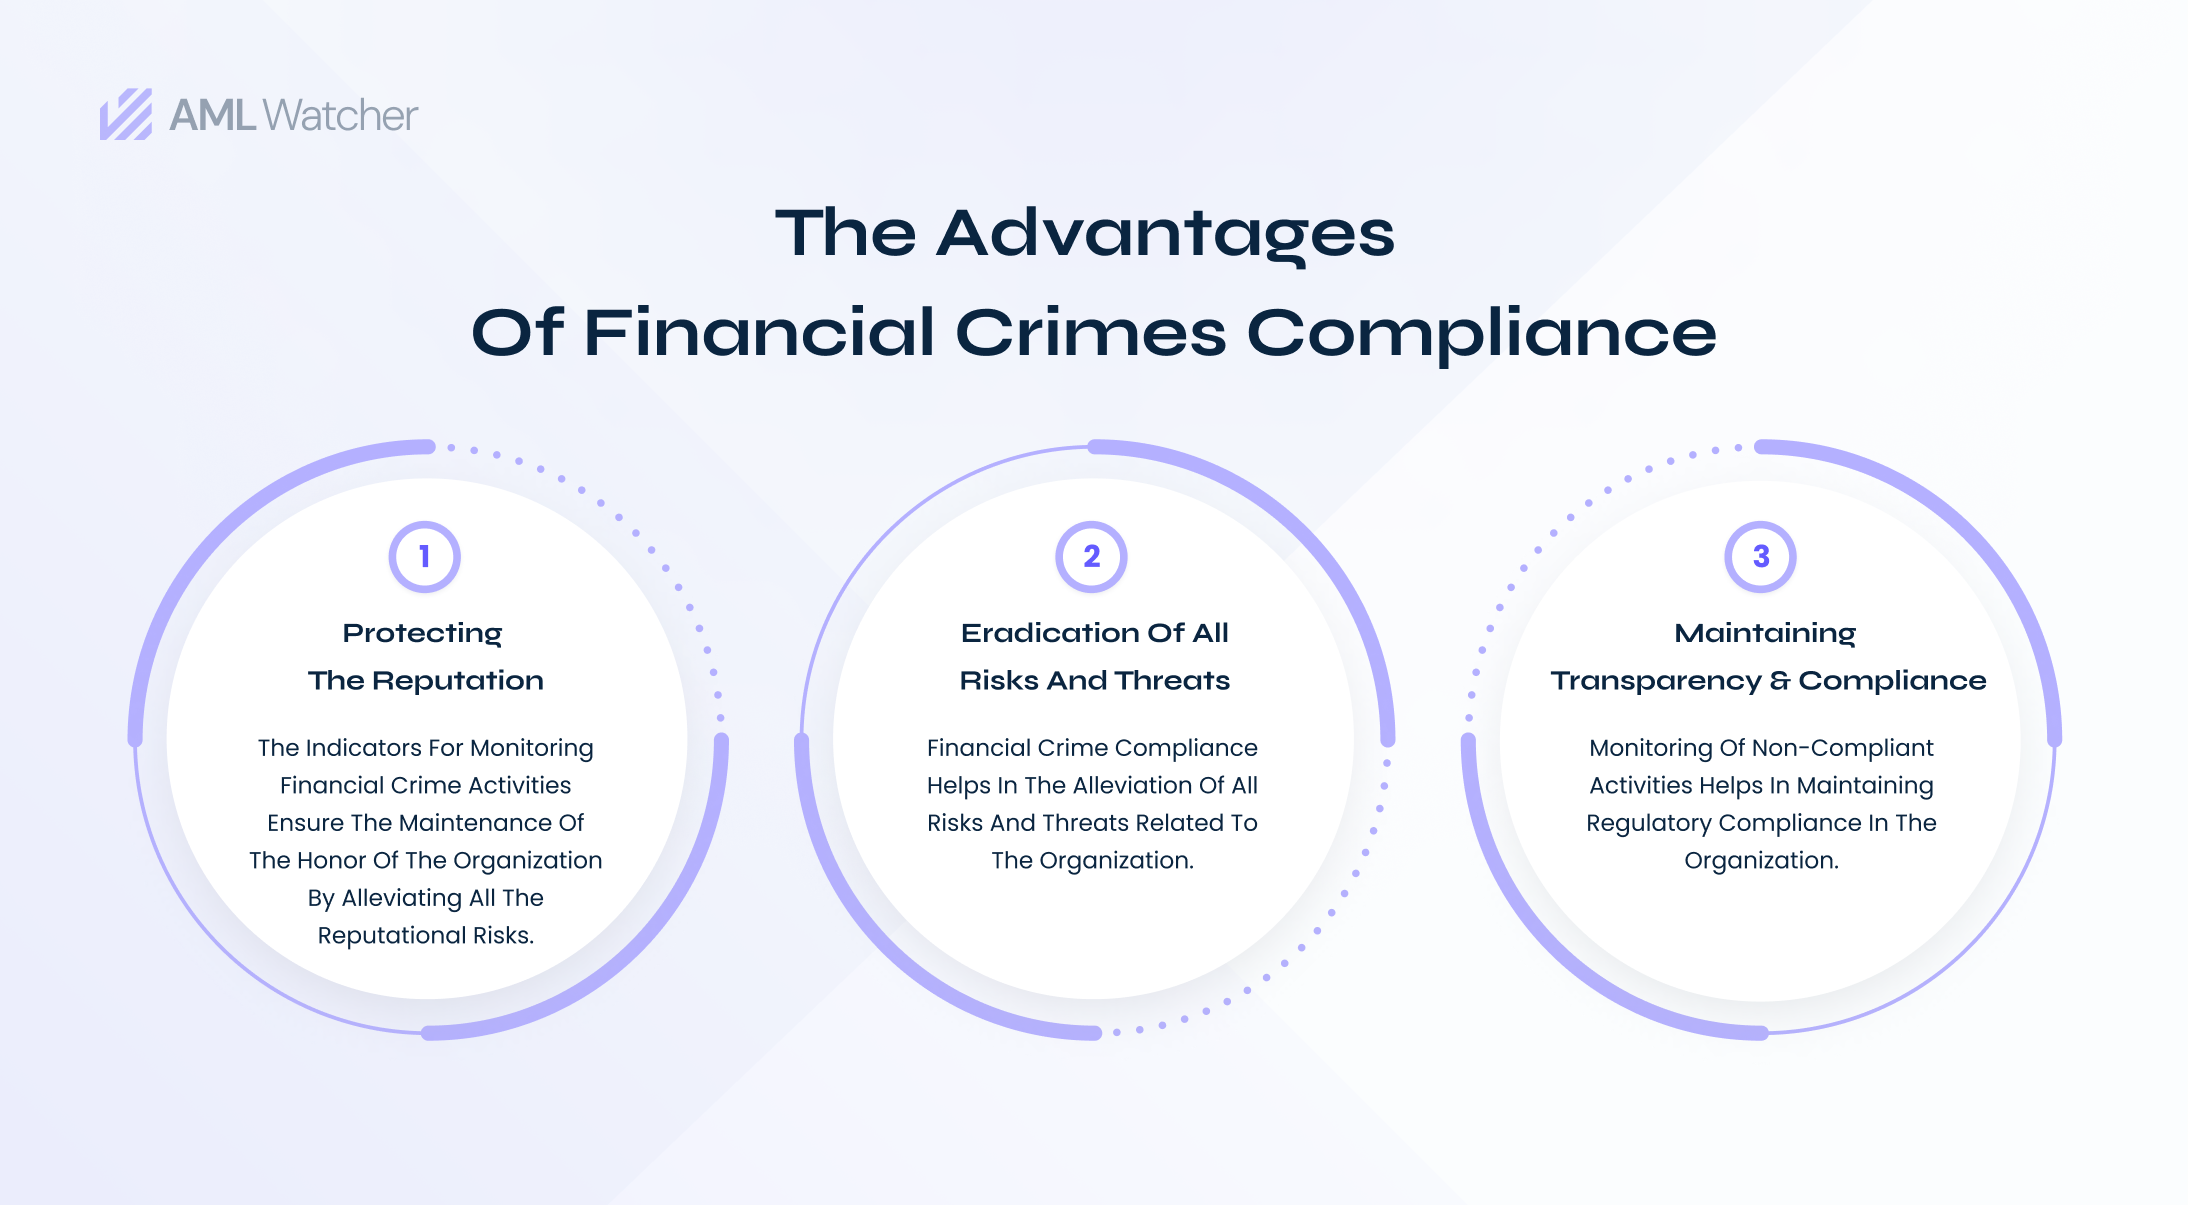 Organizations should maintain compliance to avoid the plurality of financial crimes. 